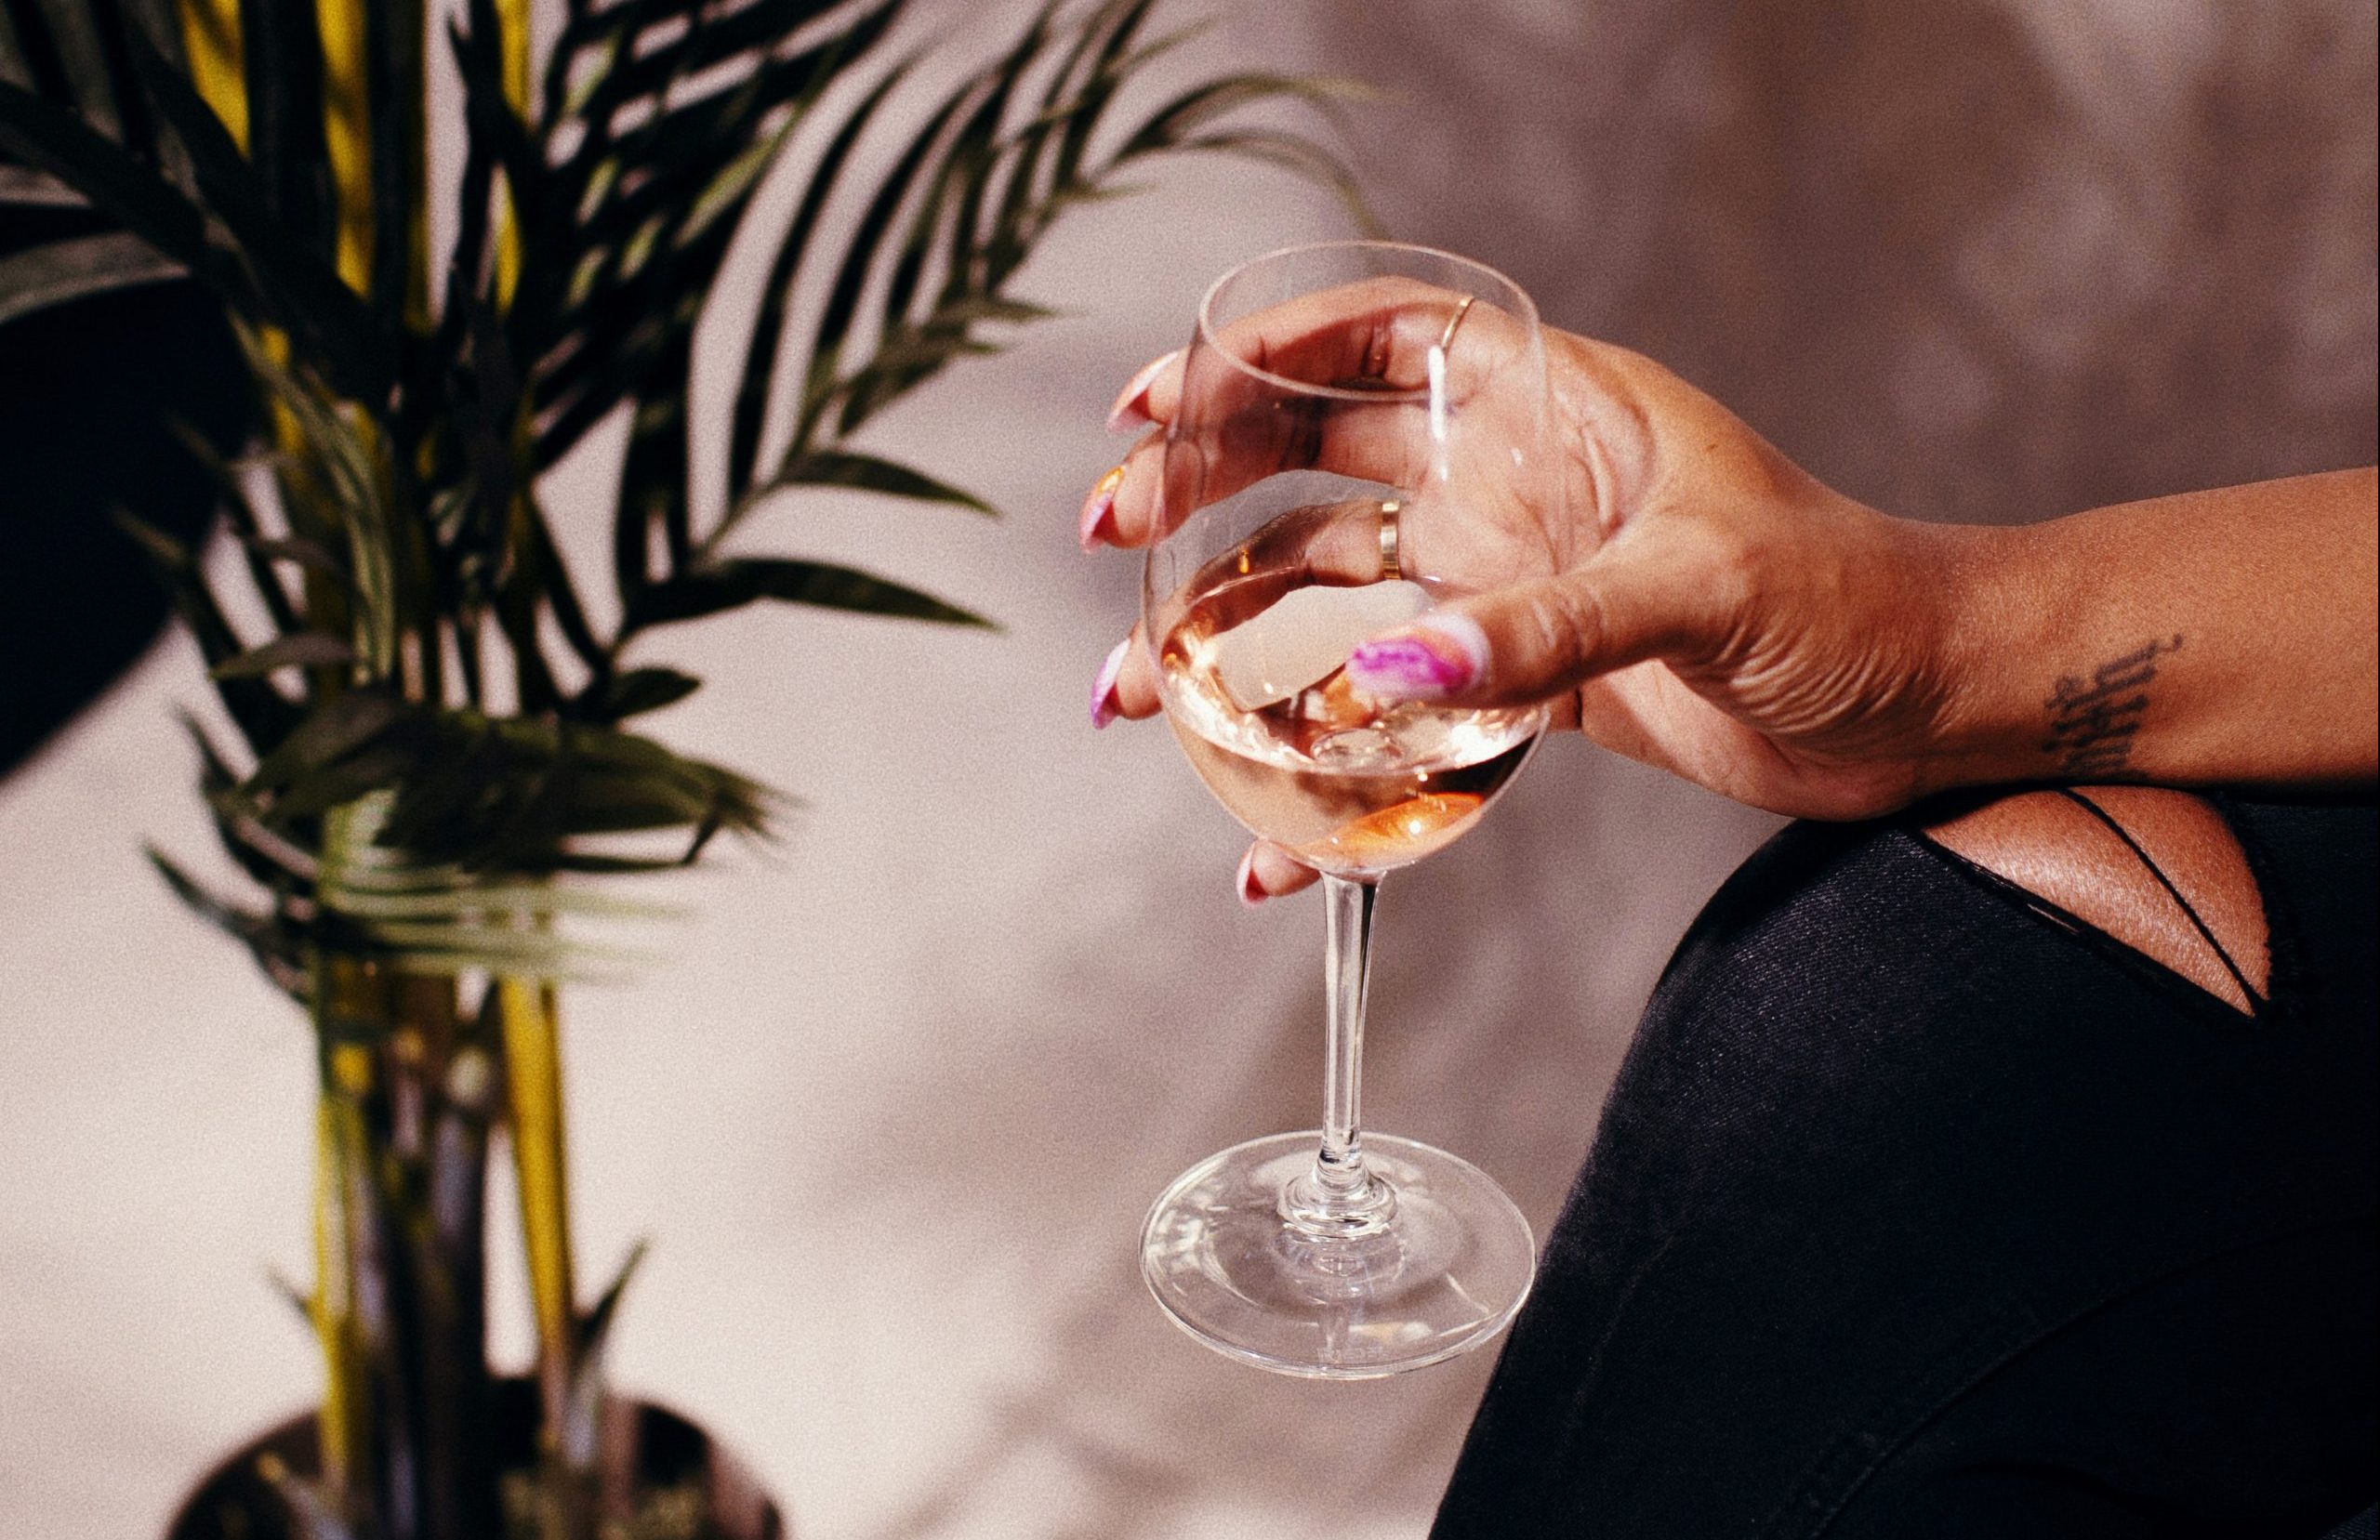 Close-up of a woman's hand holding a glass of amie x rosé.